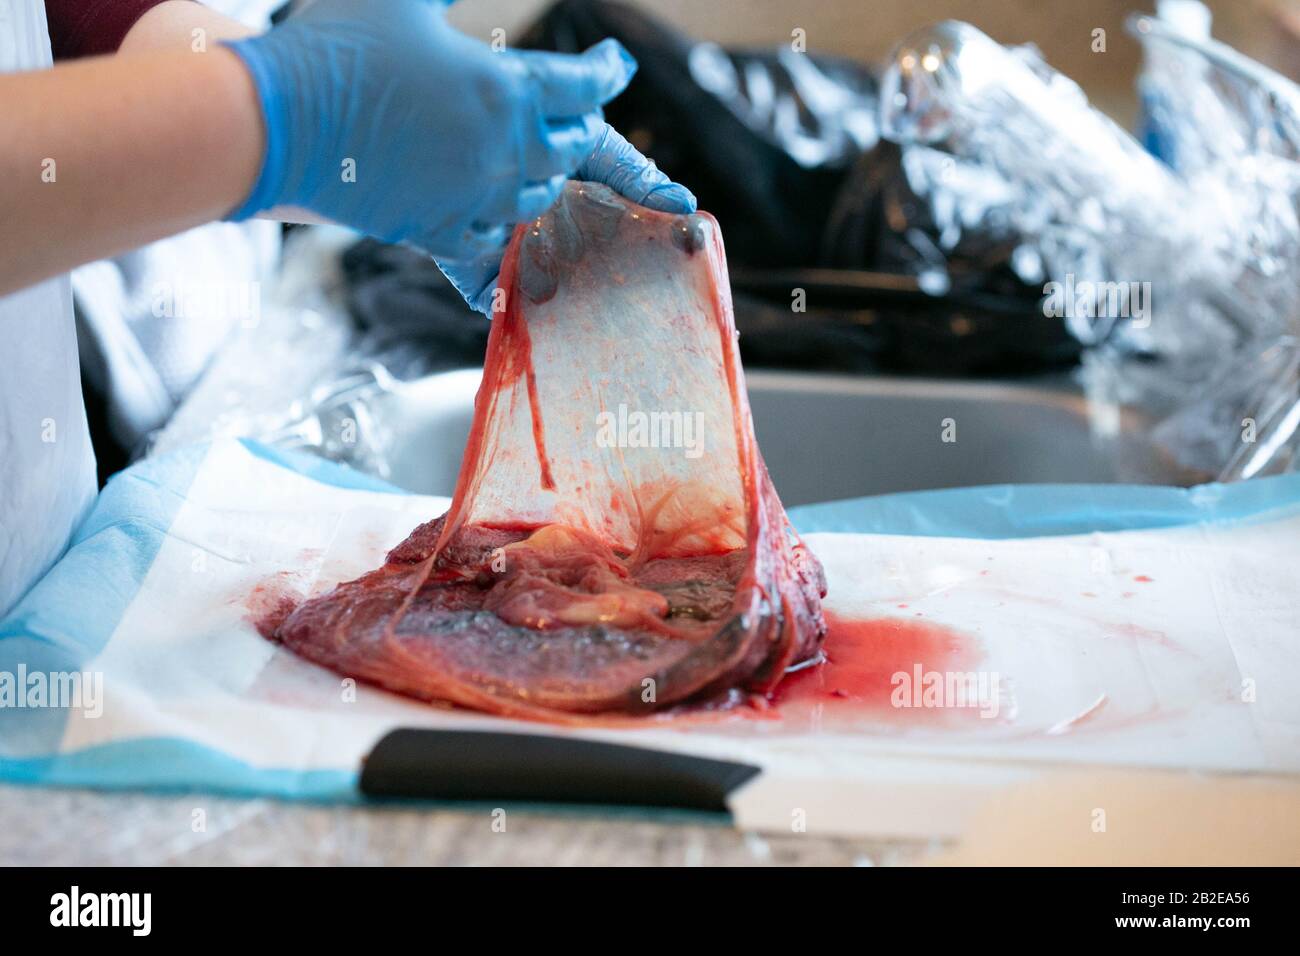 Gloved hands holding open amniotic sac attached to placenta. Stock Photo